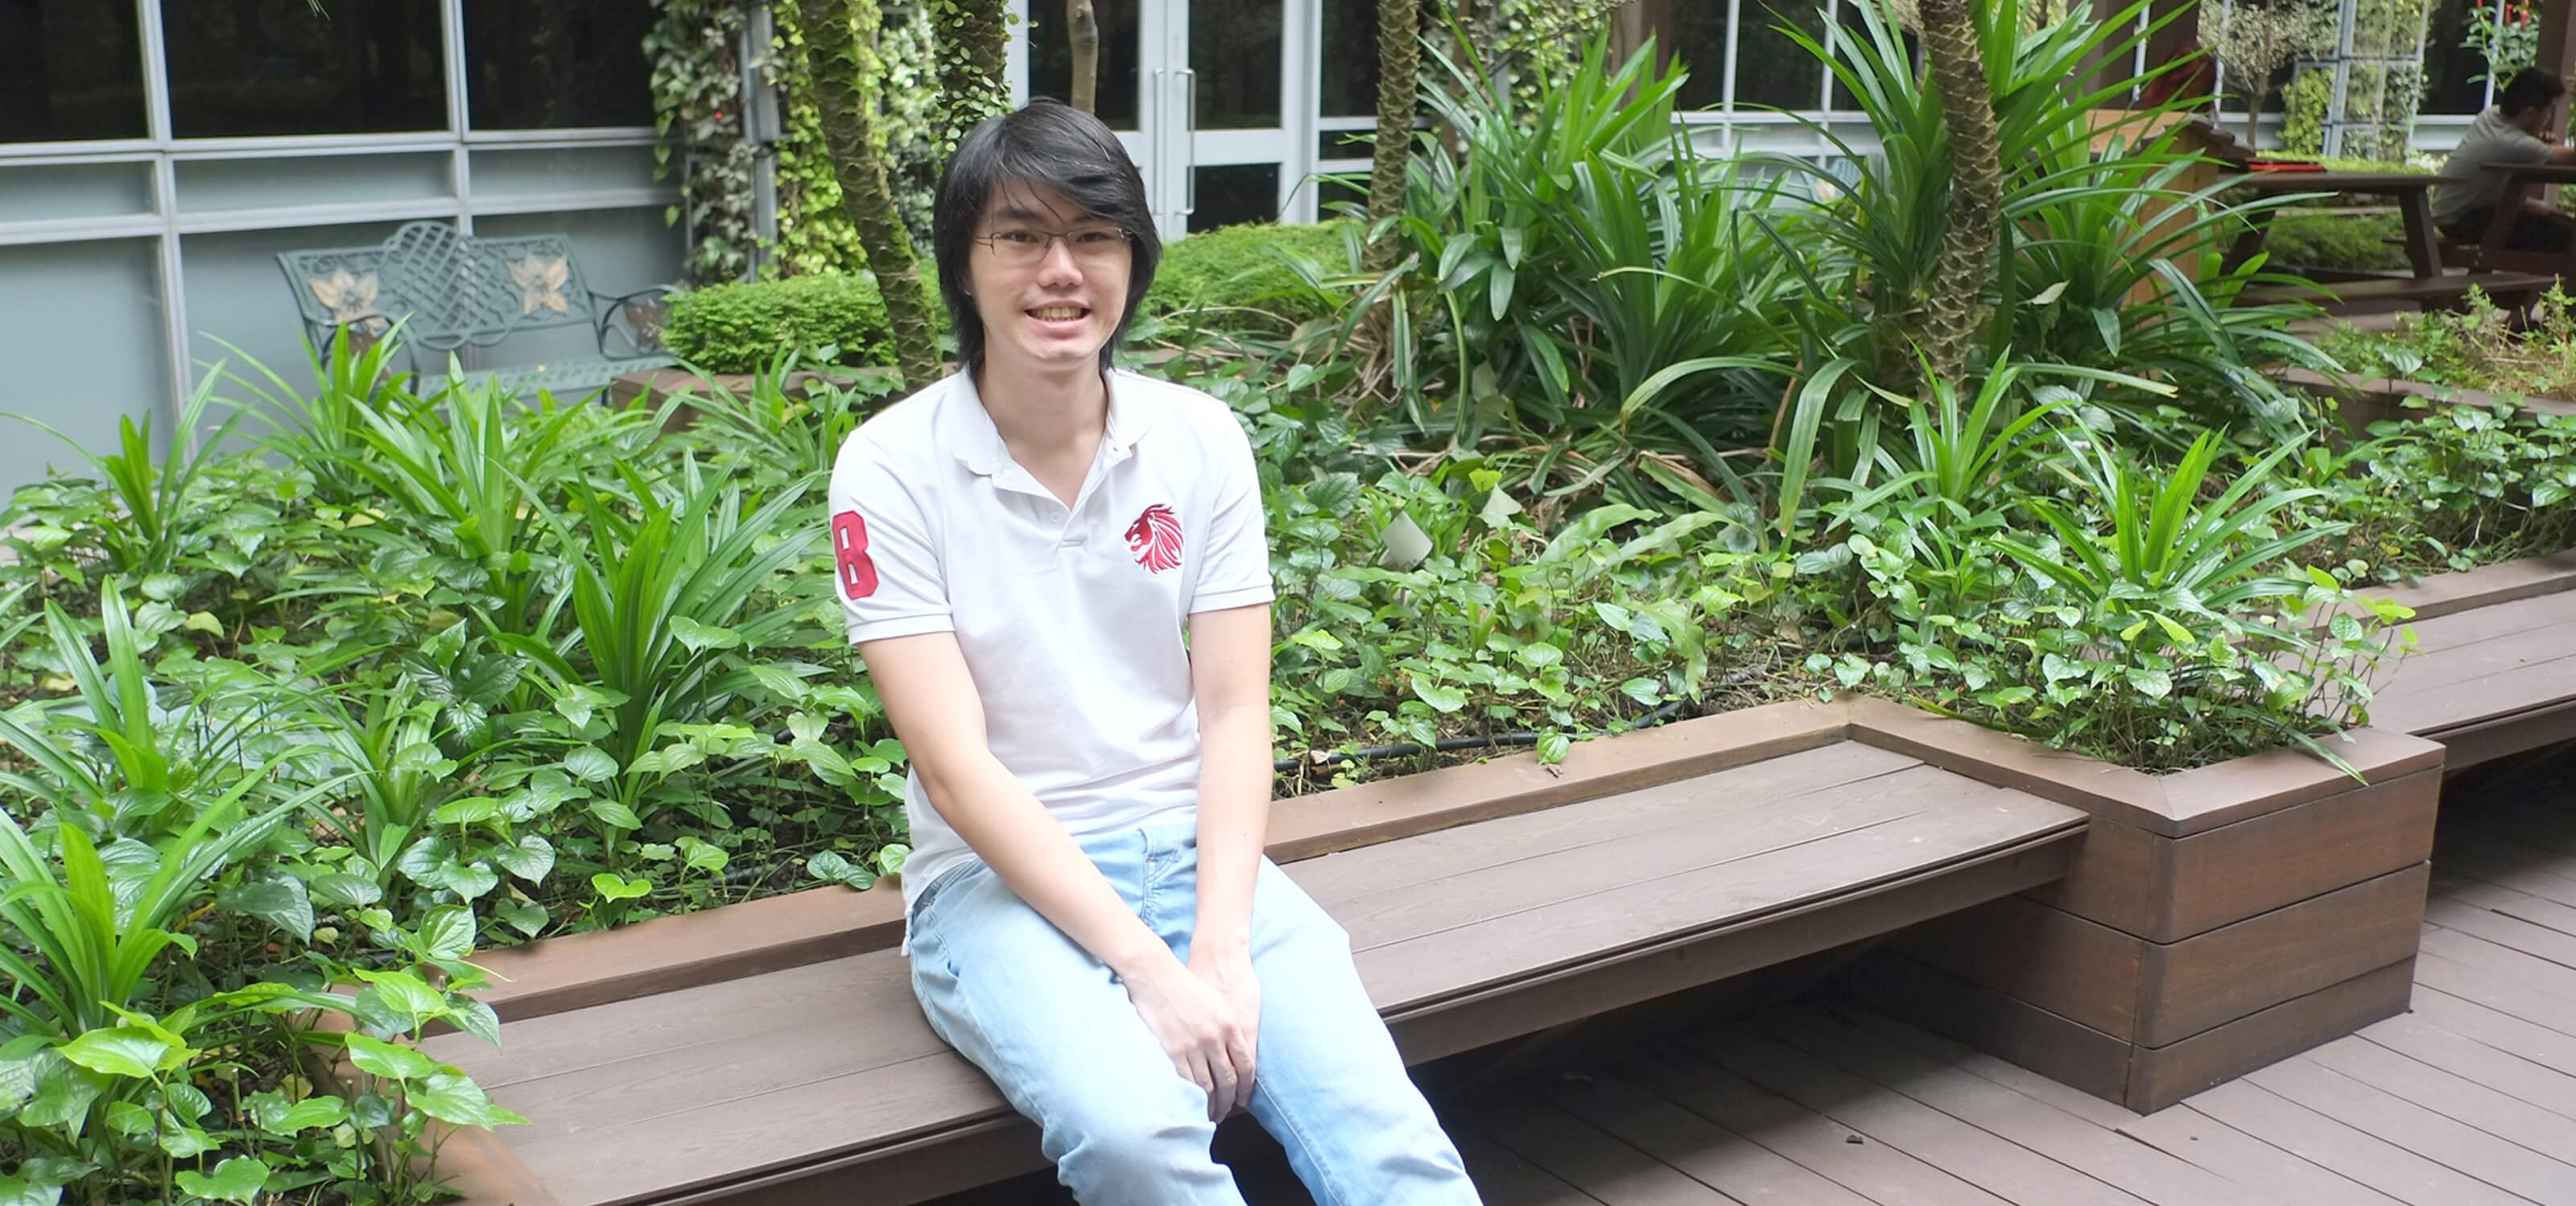 DigiPen graduate Cheng Ding Xiang poses for a photo sitting at a bench in an atrium area full of plants and trees